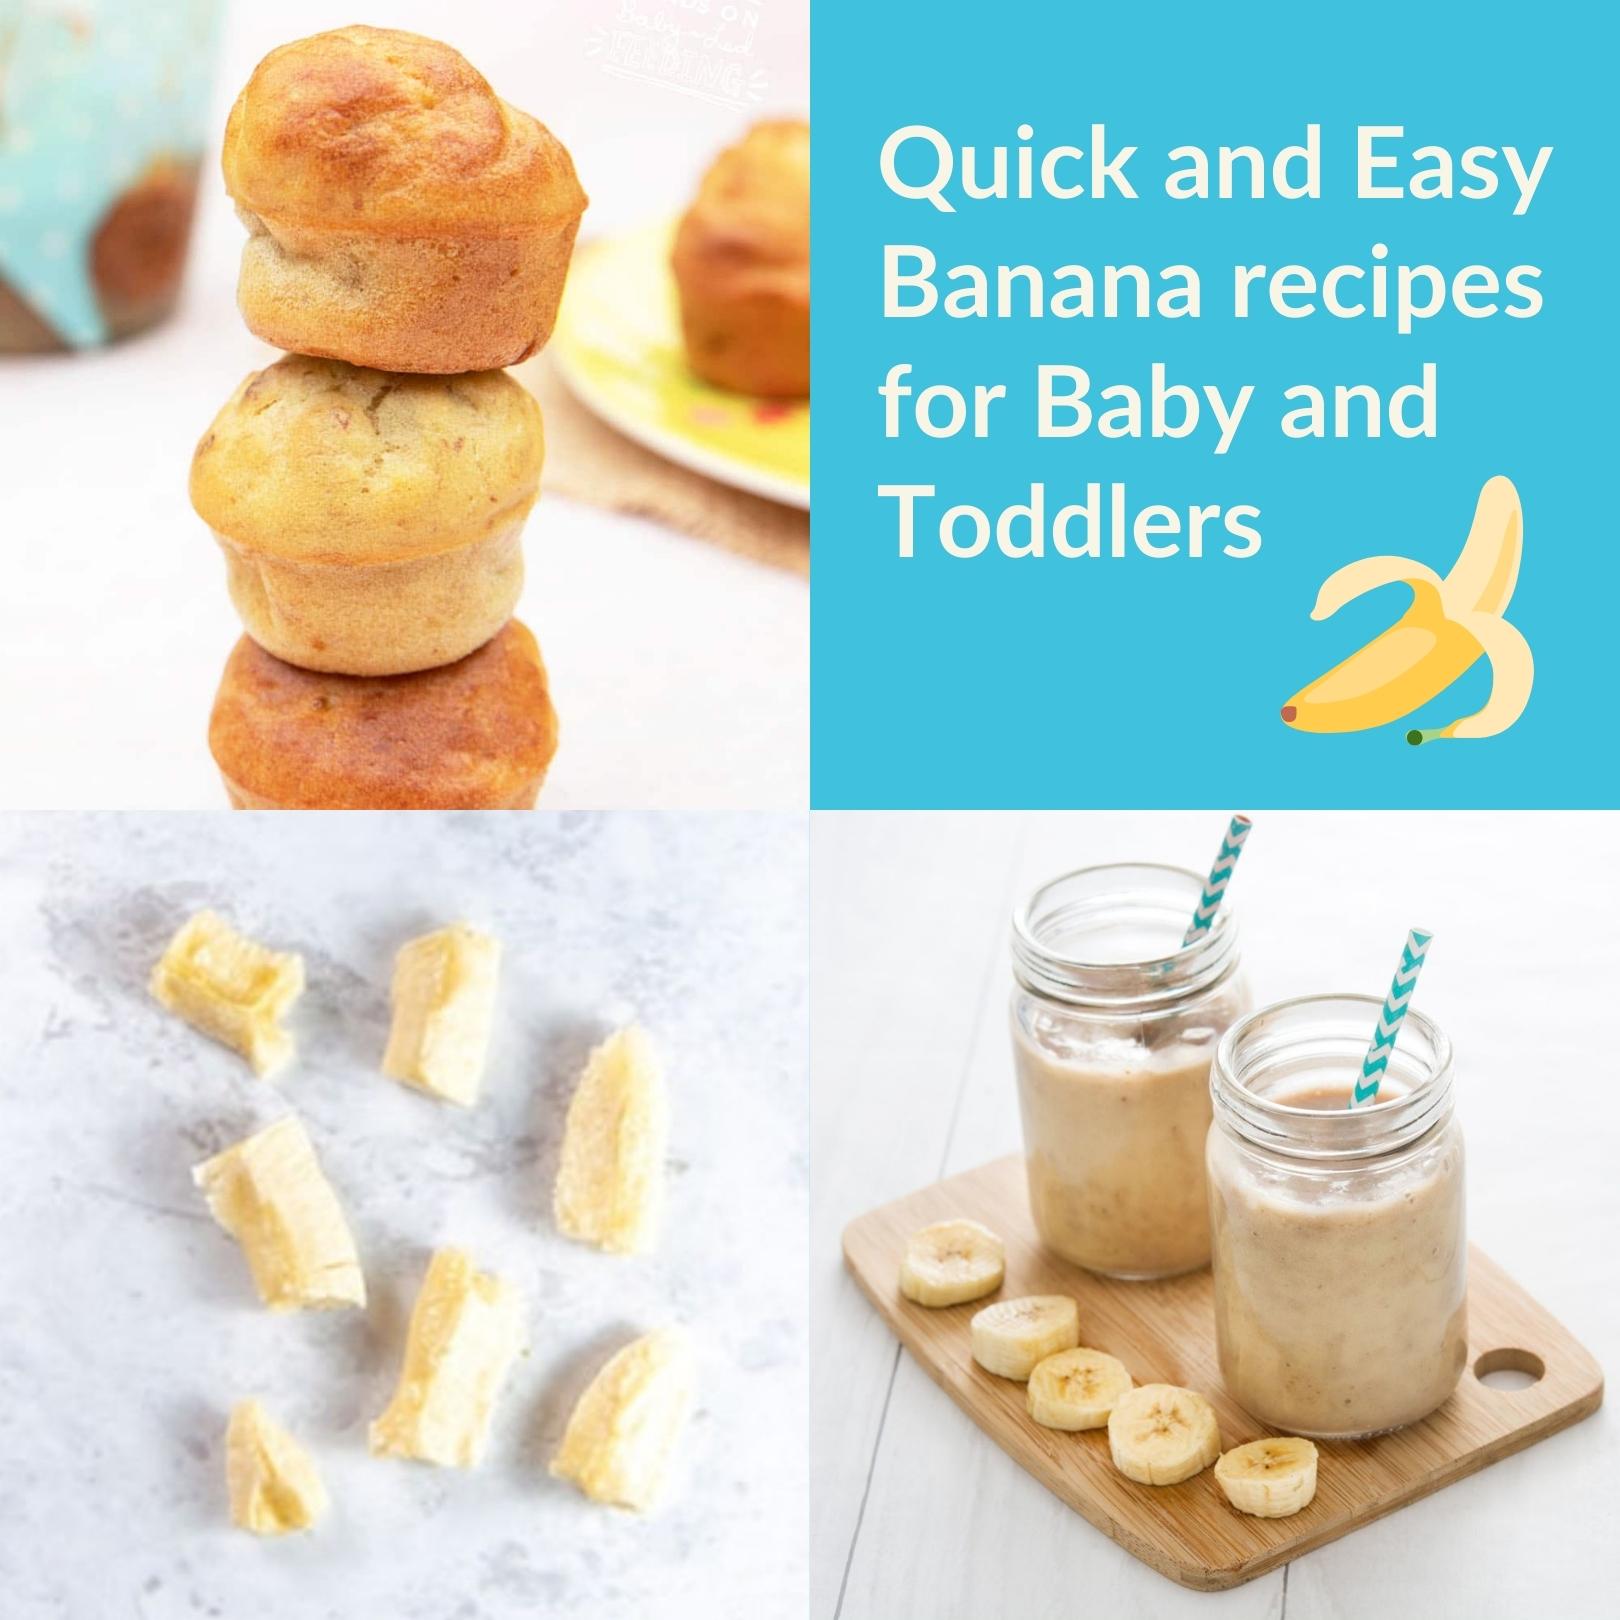 Quick and Easy Banana recipes for Babies and Toddlers